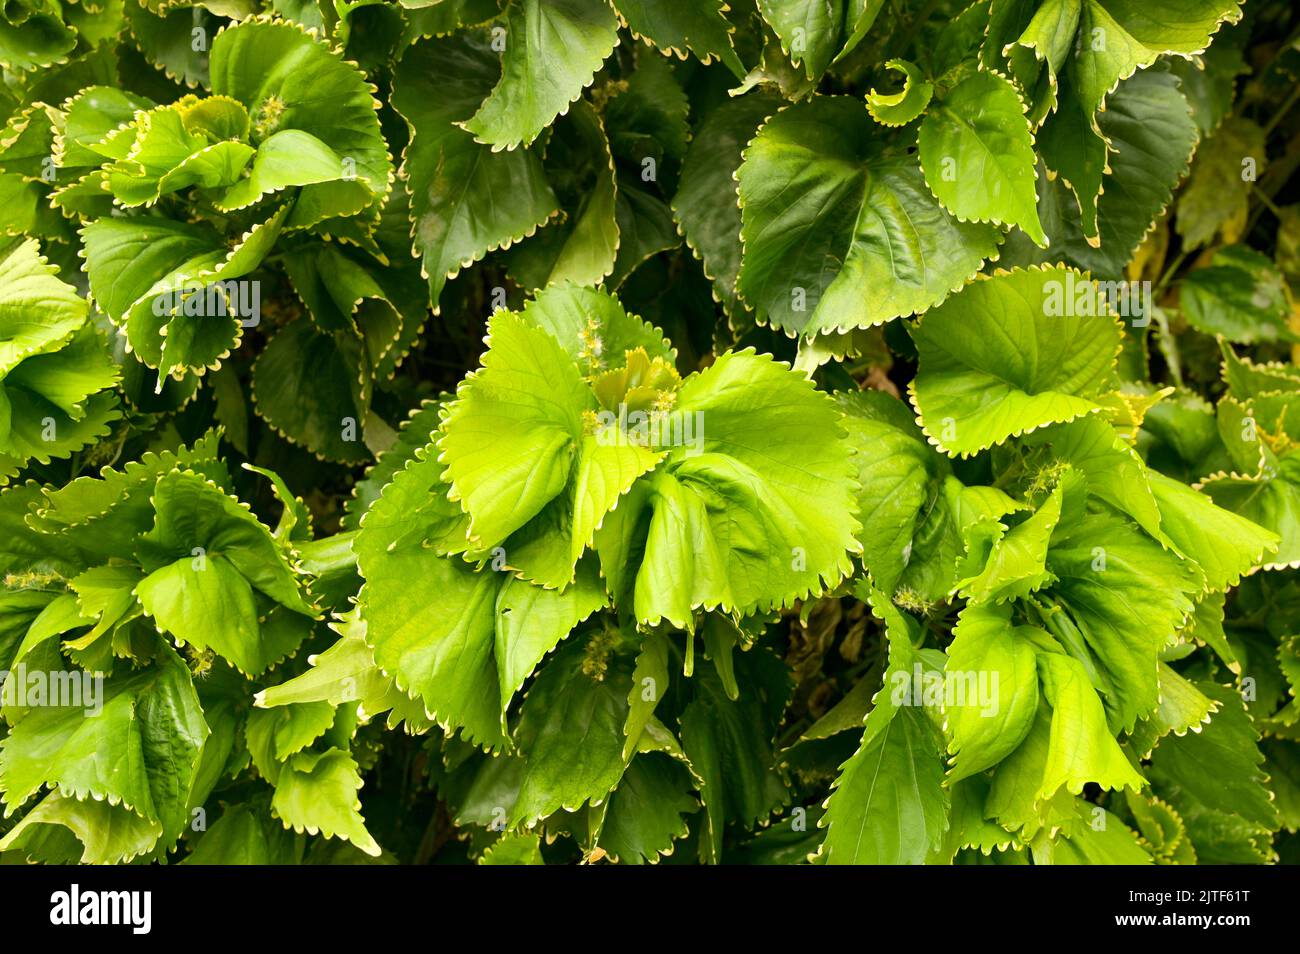 Horizontal Close-up view of Acalypha wilkesiana plant with vibrant green leaves. Horizontal High-quality photo Stock Photo